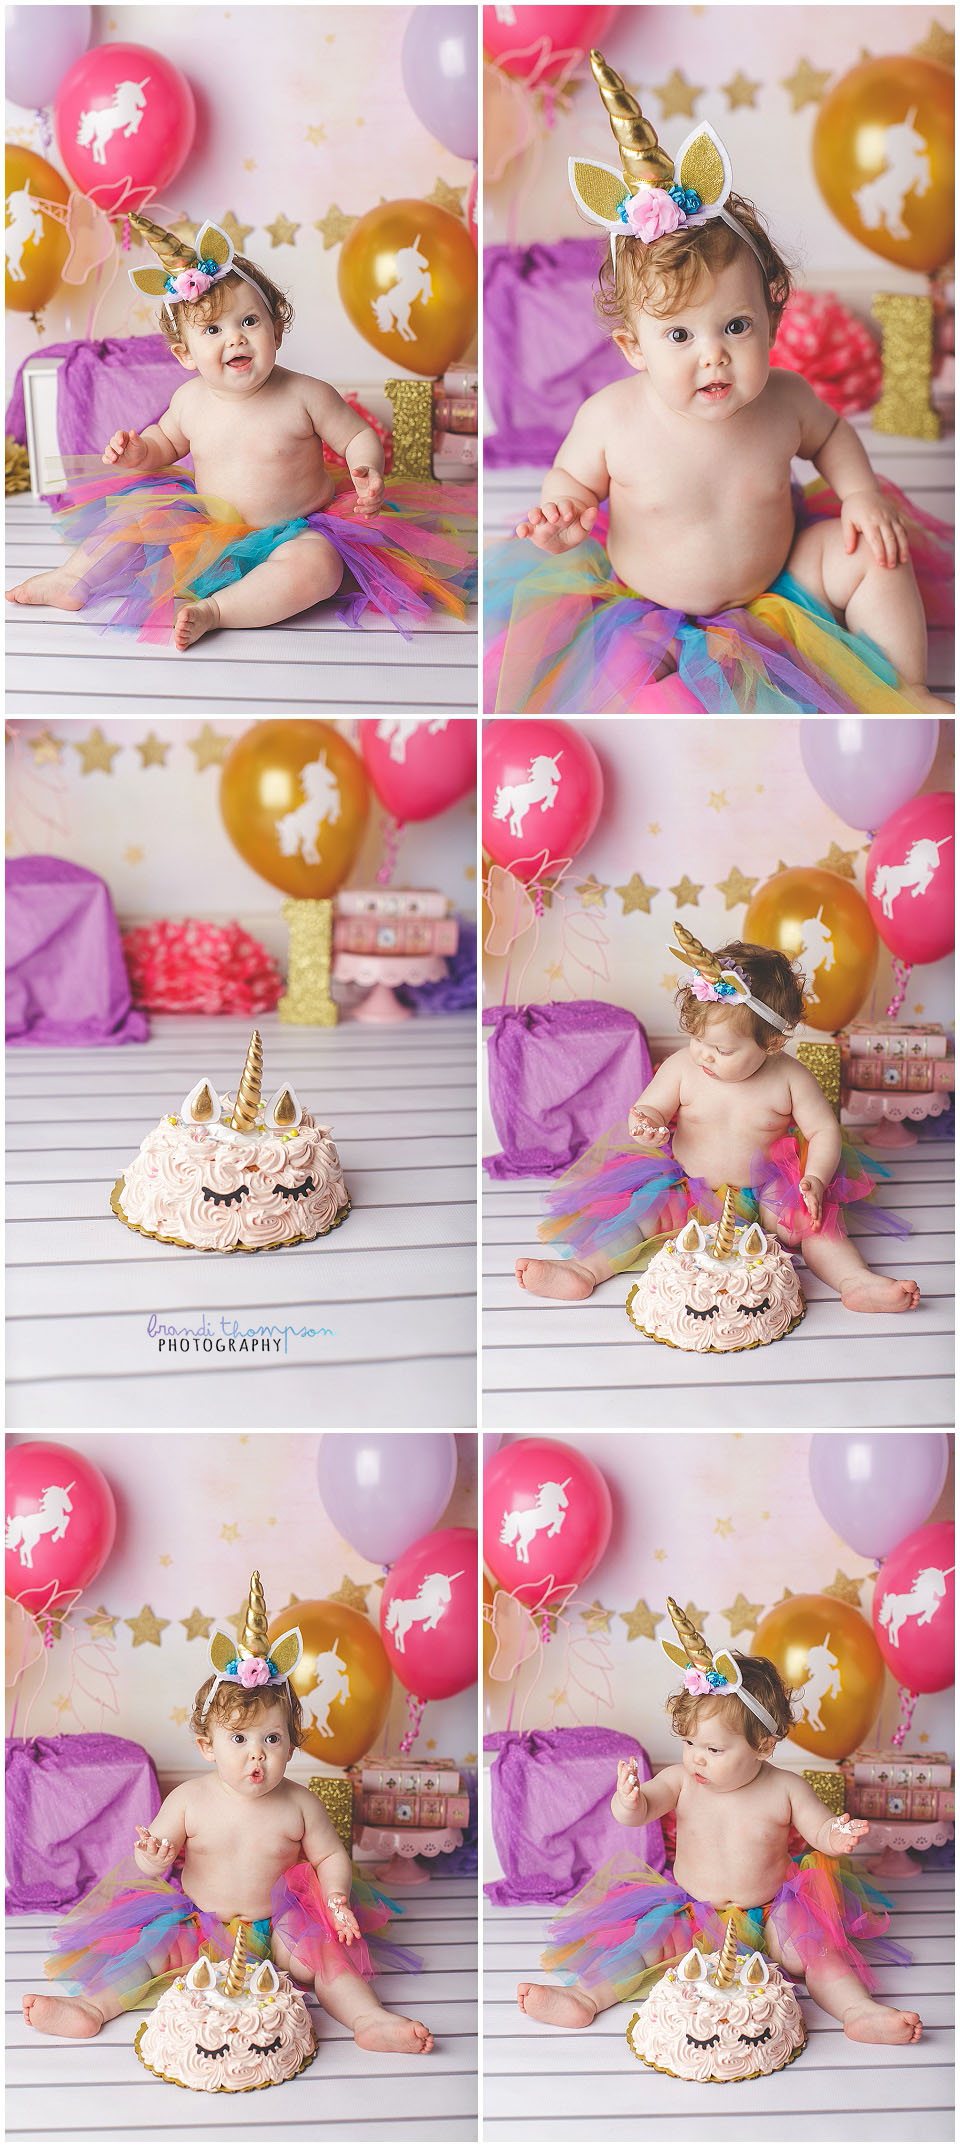 unicorn themed cake smash session for baby girl in plano, tx photography studio